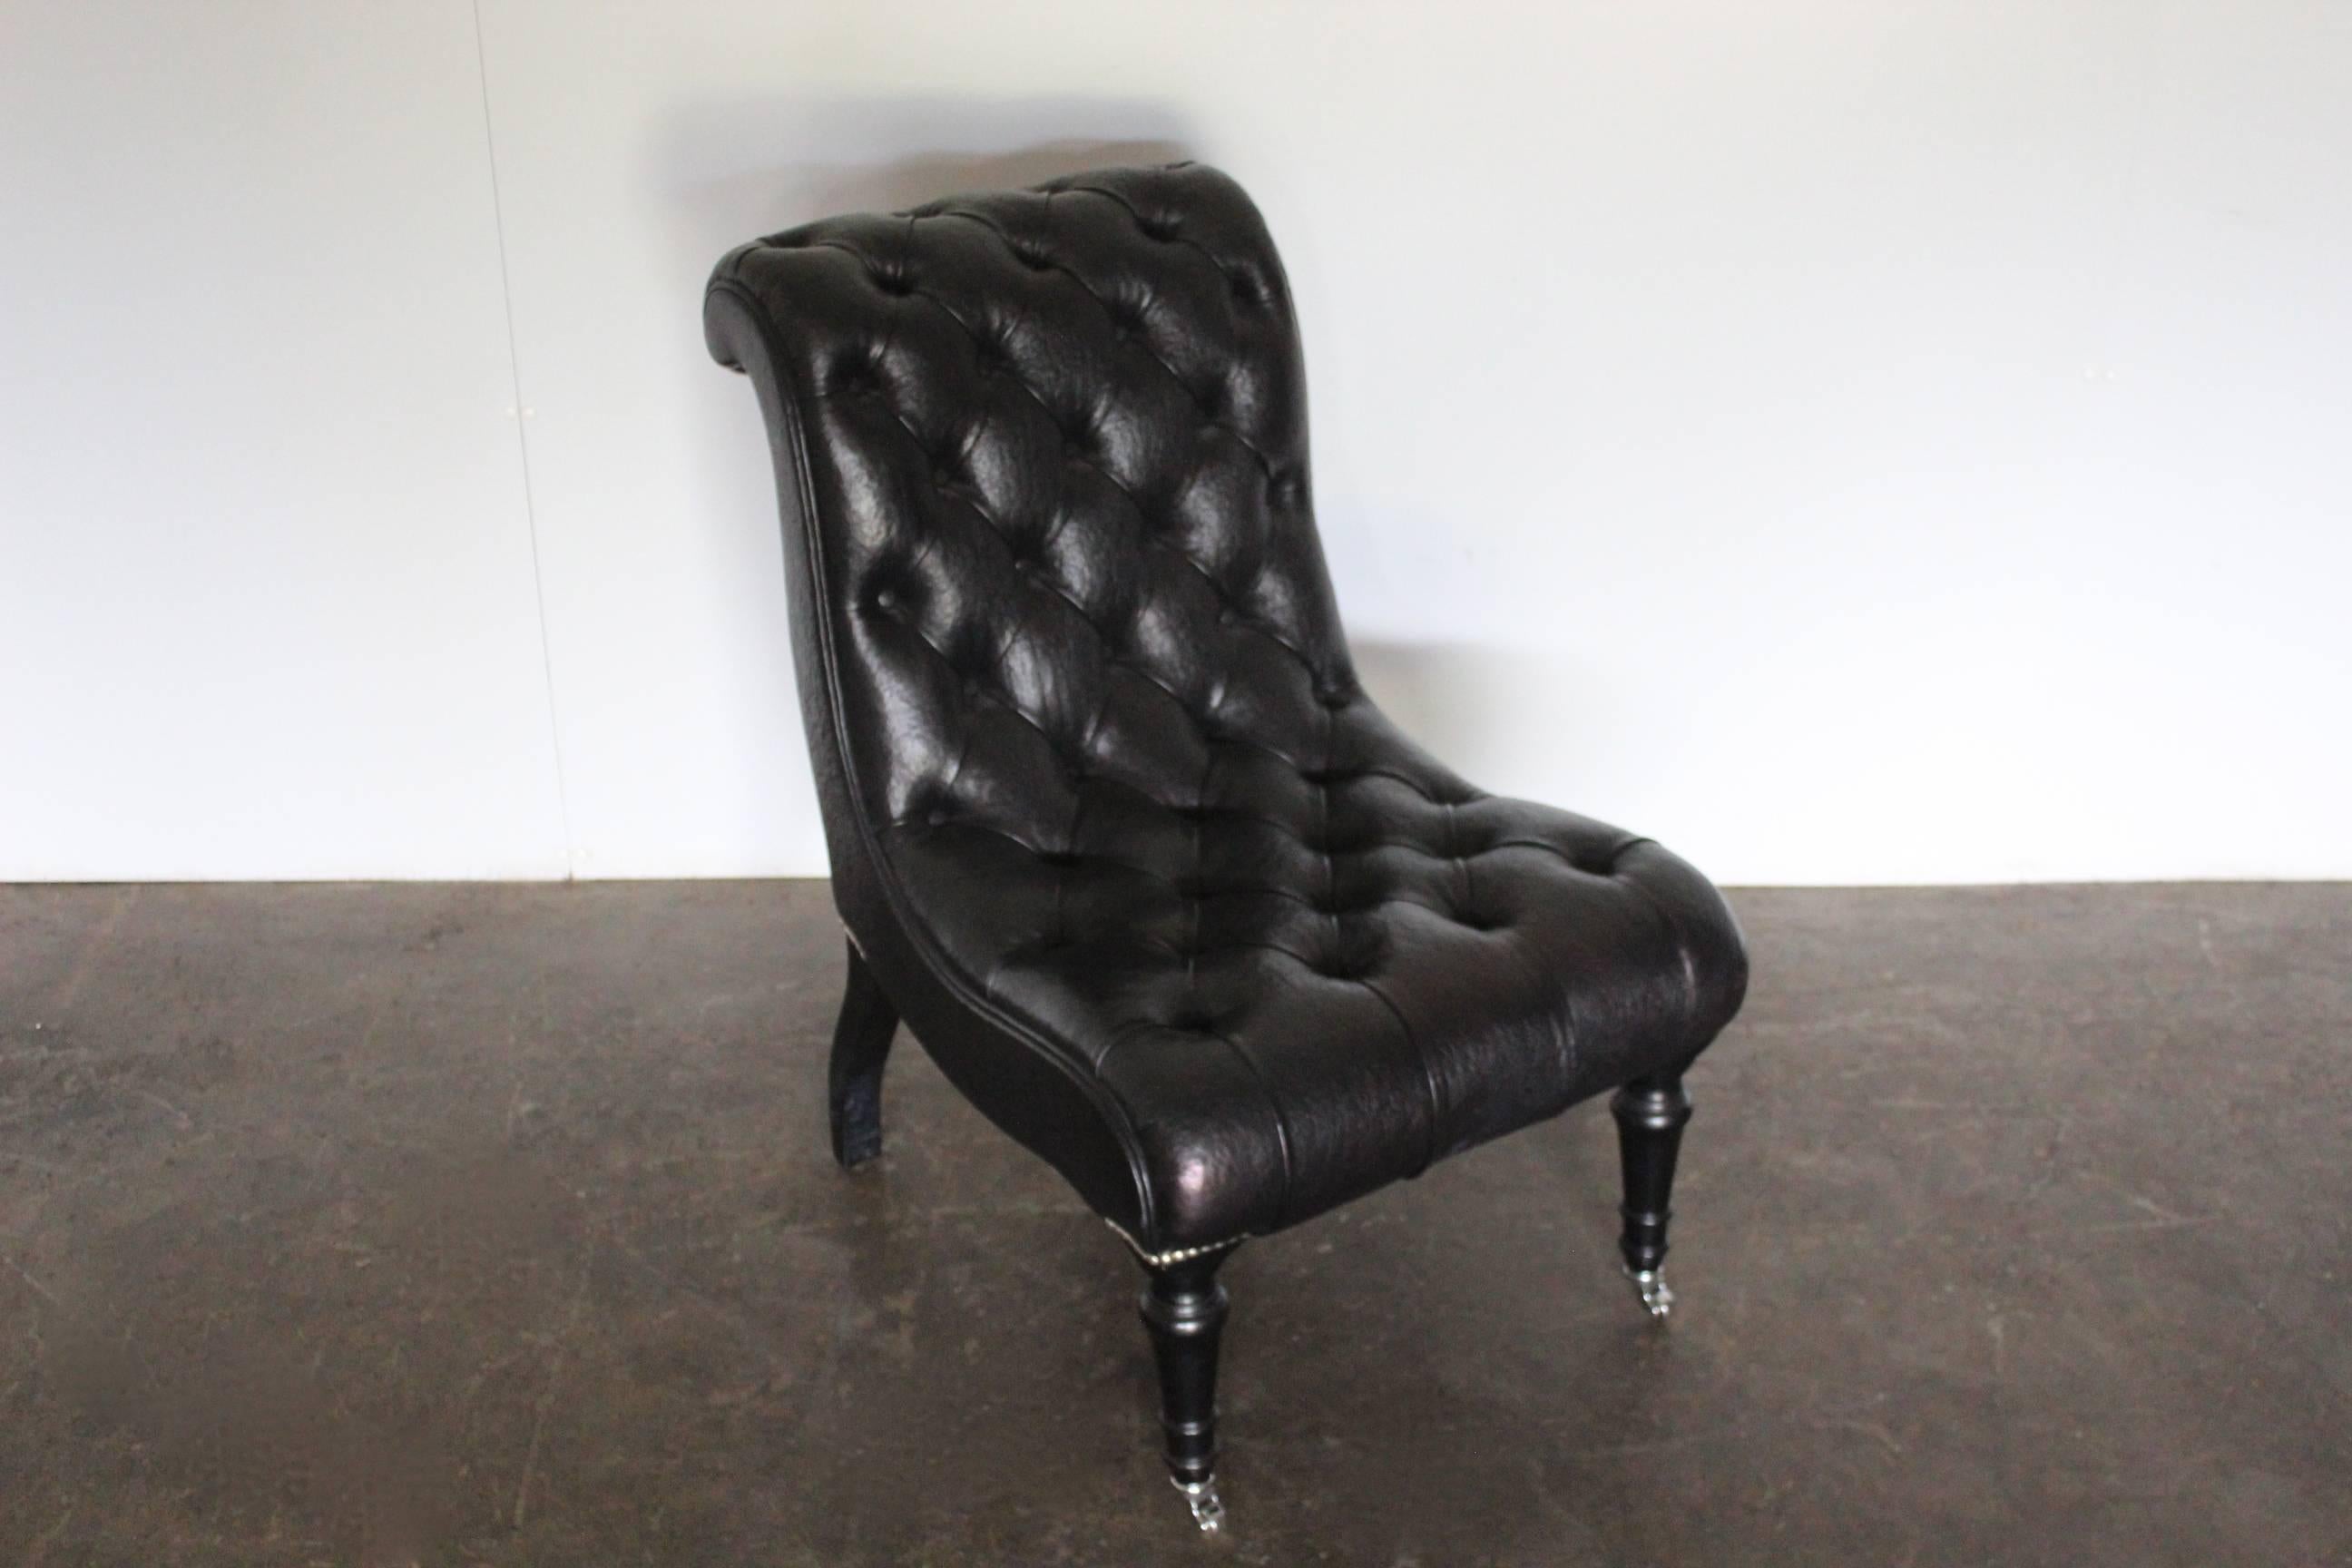 On offer on this occasion is a superb “Brewster” Armchair, dressed in a Peerless, top-grade, special-order textured-leather in Jet Black. Presented with Dark Mahogany legs and Polished-Chrome detail.

As you will no doubt be aware by your interest